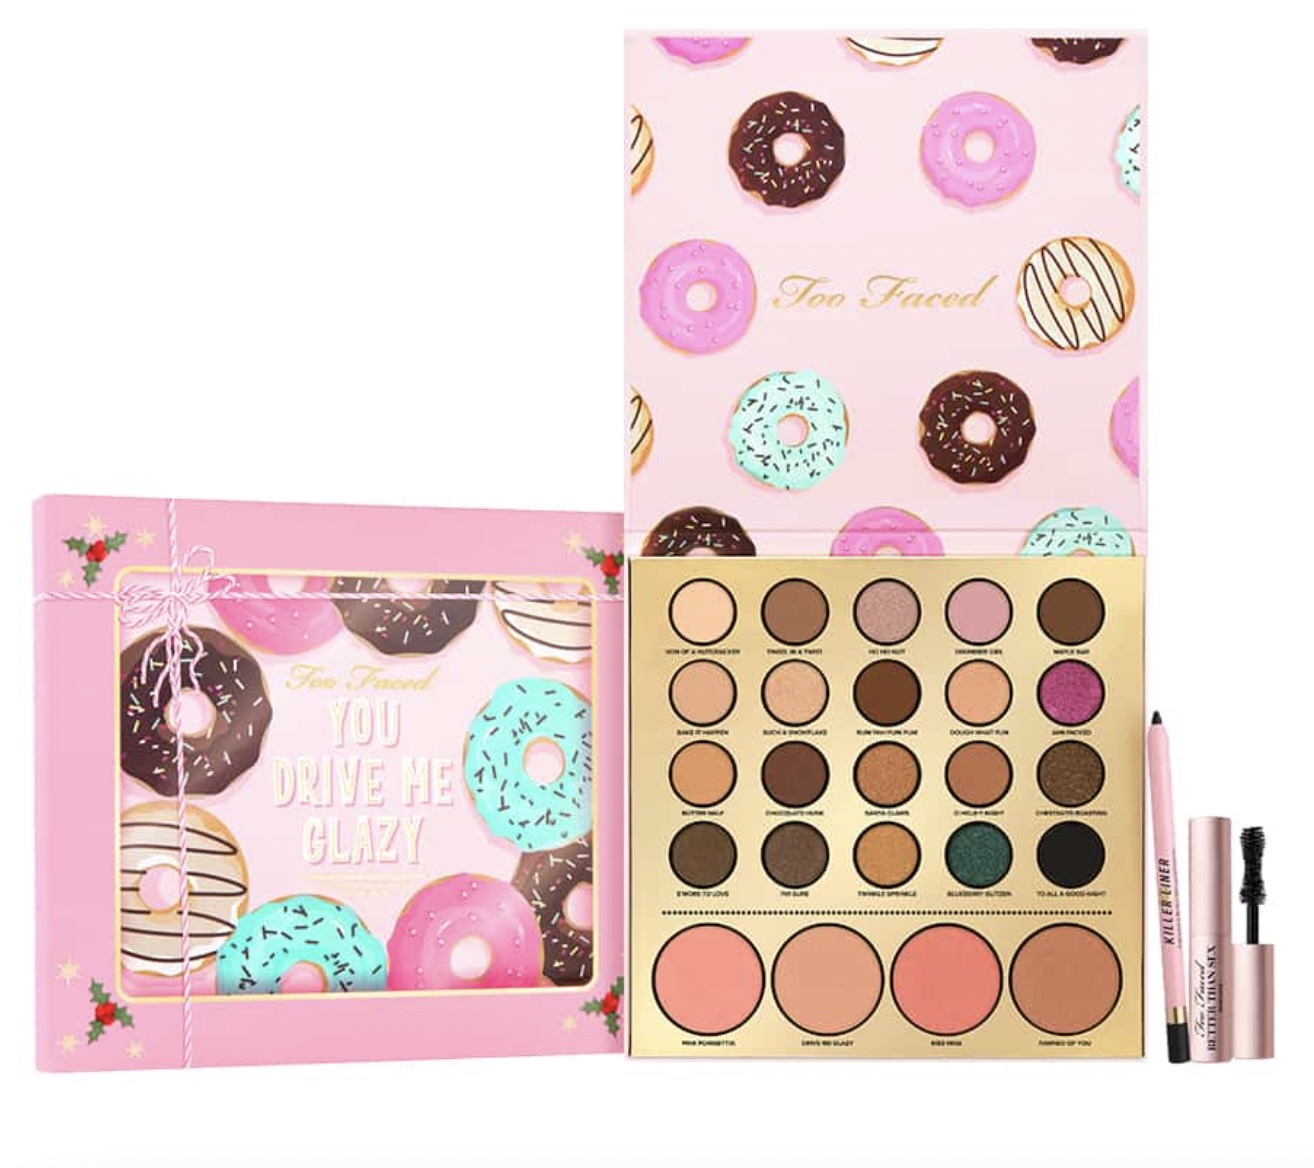 Collection de Noël 2022 Too Faced You Drive Me Glazy